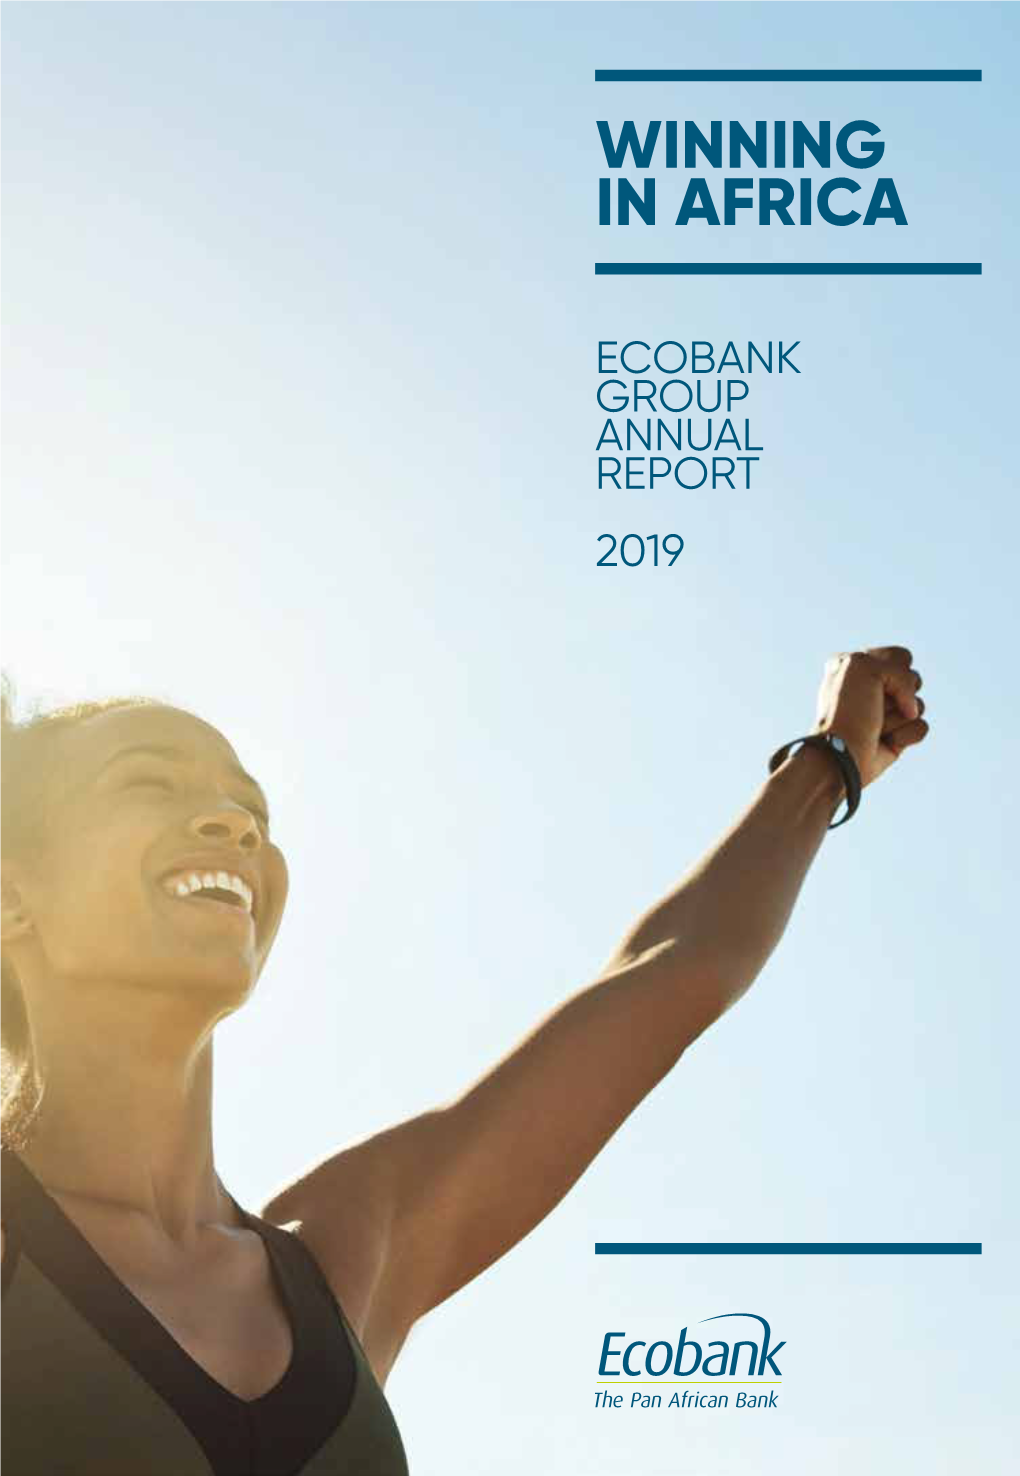 Ecobank Group Annual Report 2019 Winning in Africa